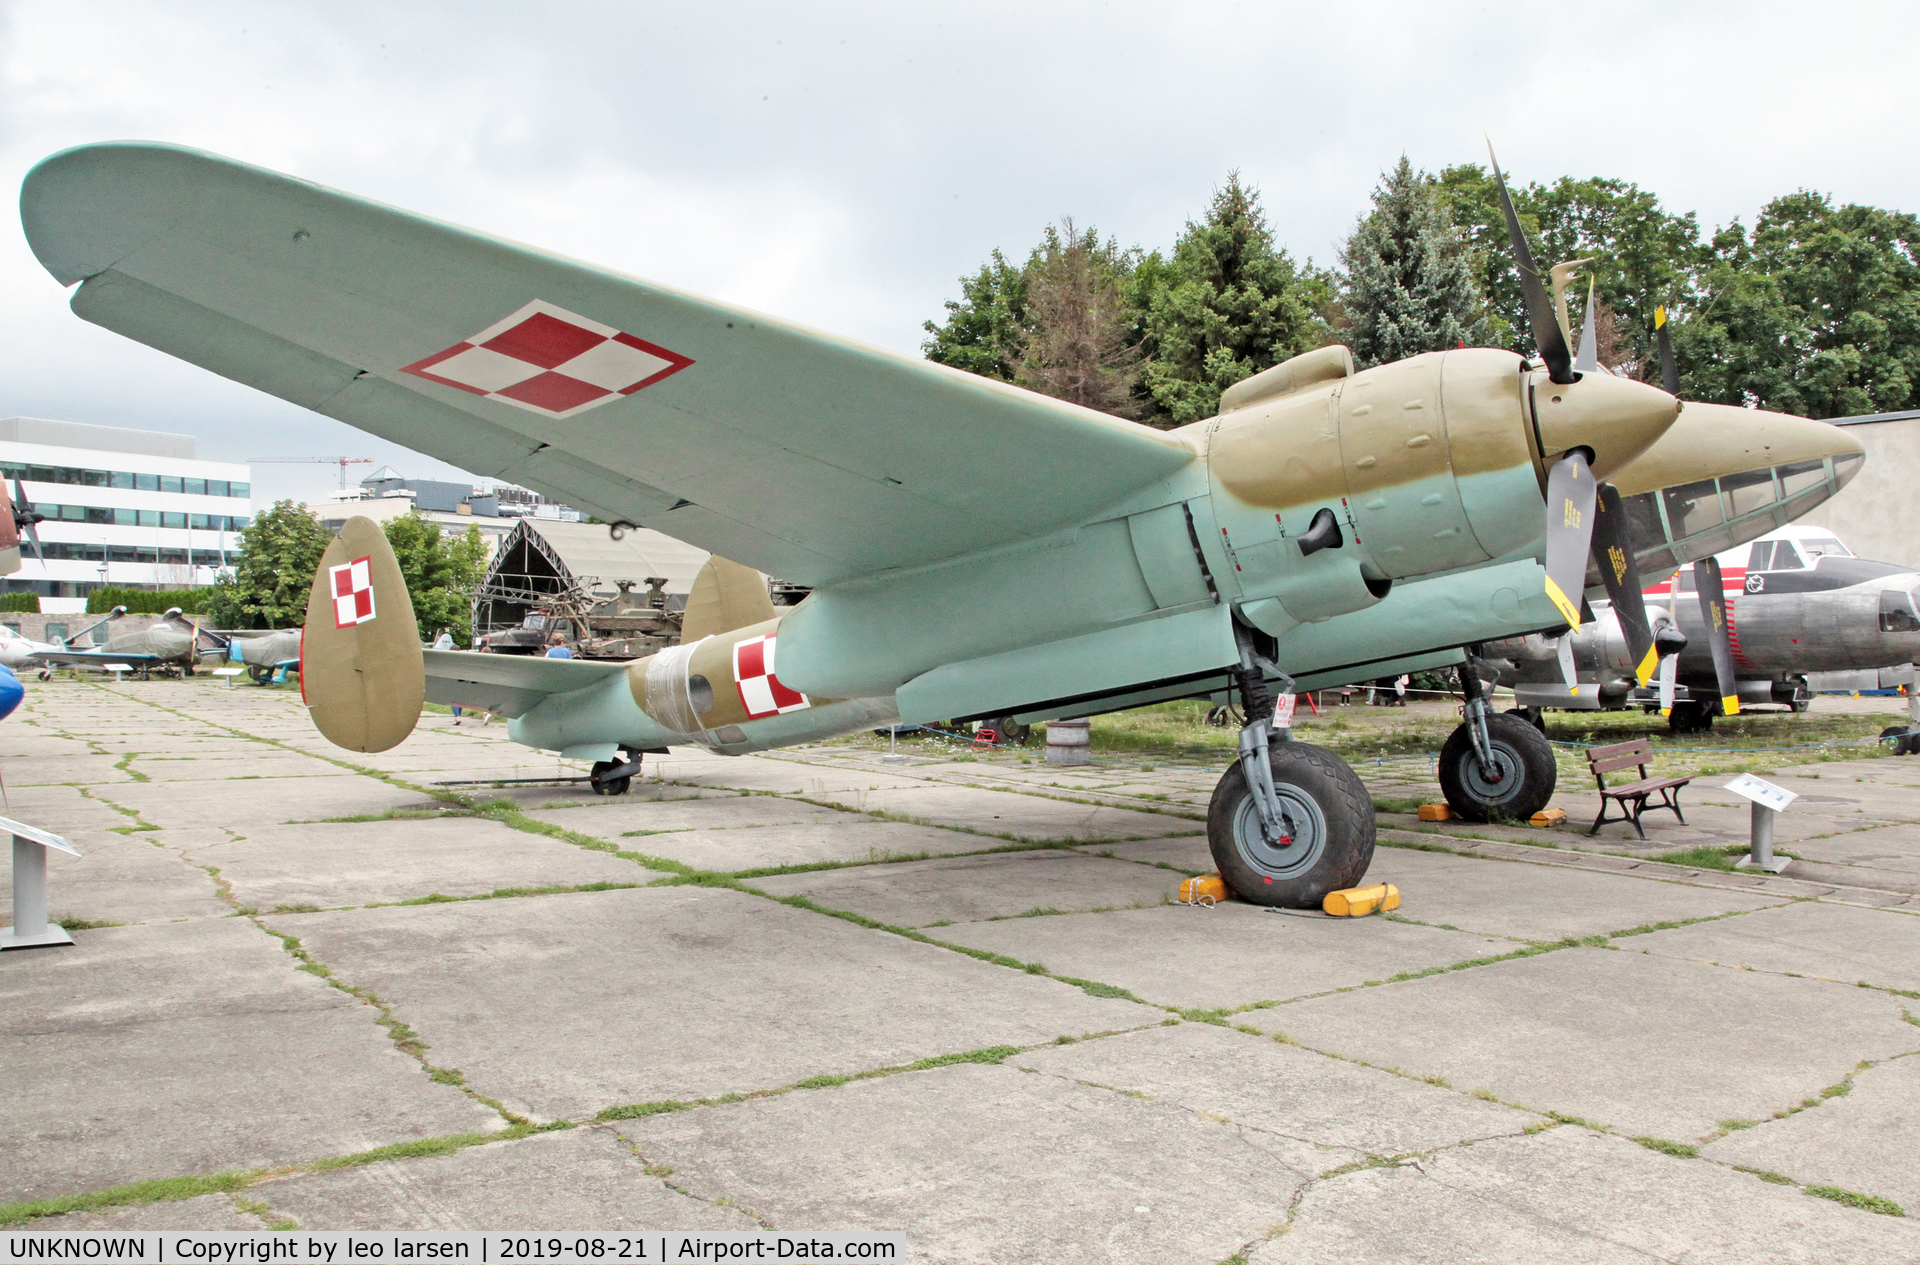 UNKNOWN, 1947 Tupolev Tu-2S C/N not found, Kracow Air museum 21.8.2019